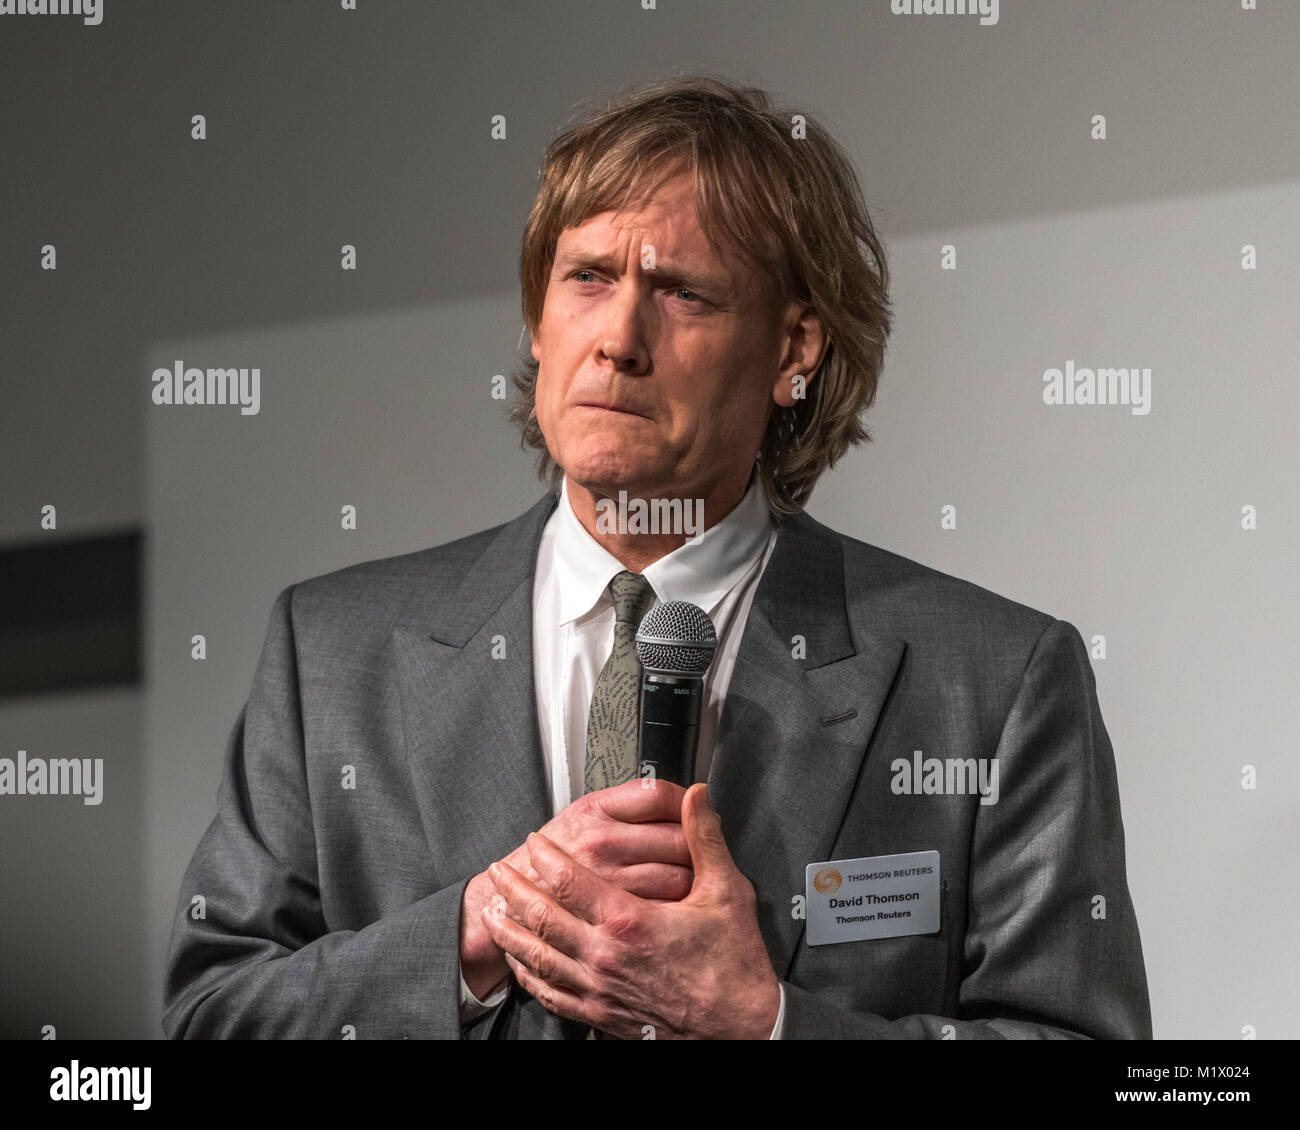 New York, USA, 5 Dec 2016. Thomson Reuters chairman David Thomson, 3rd Baron of Fleet speaks at an event in New York city.. Enrique Shore/Alamy Stock Photo